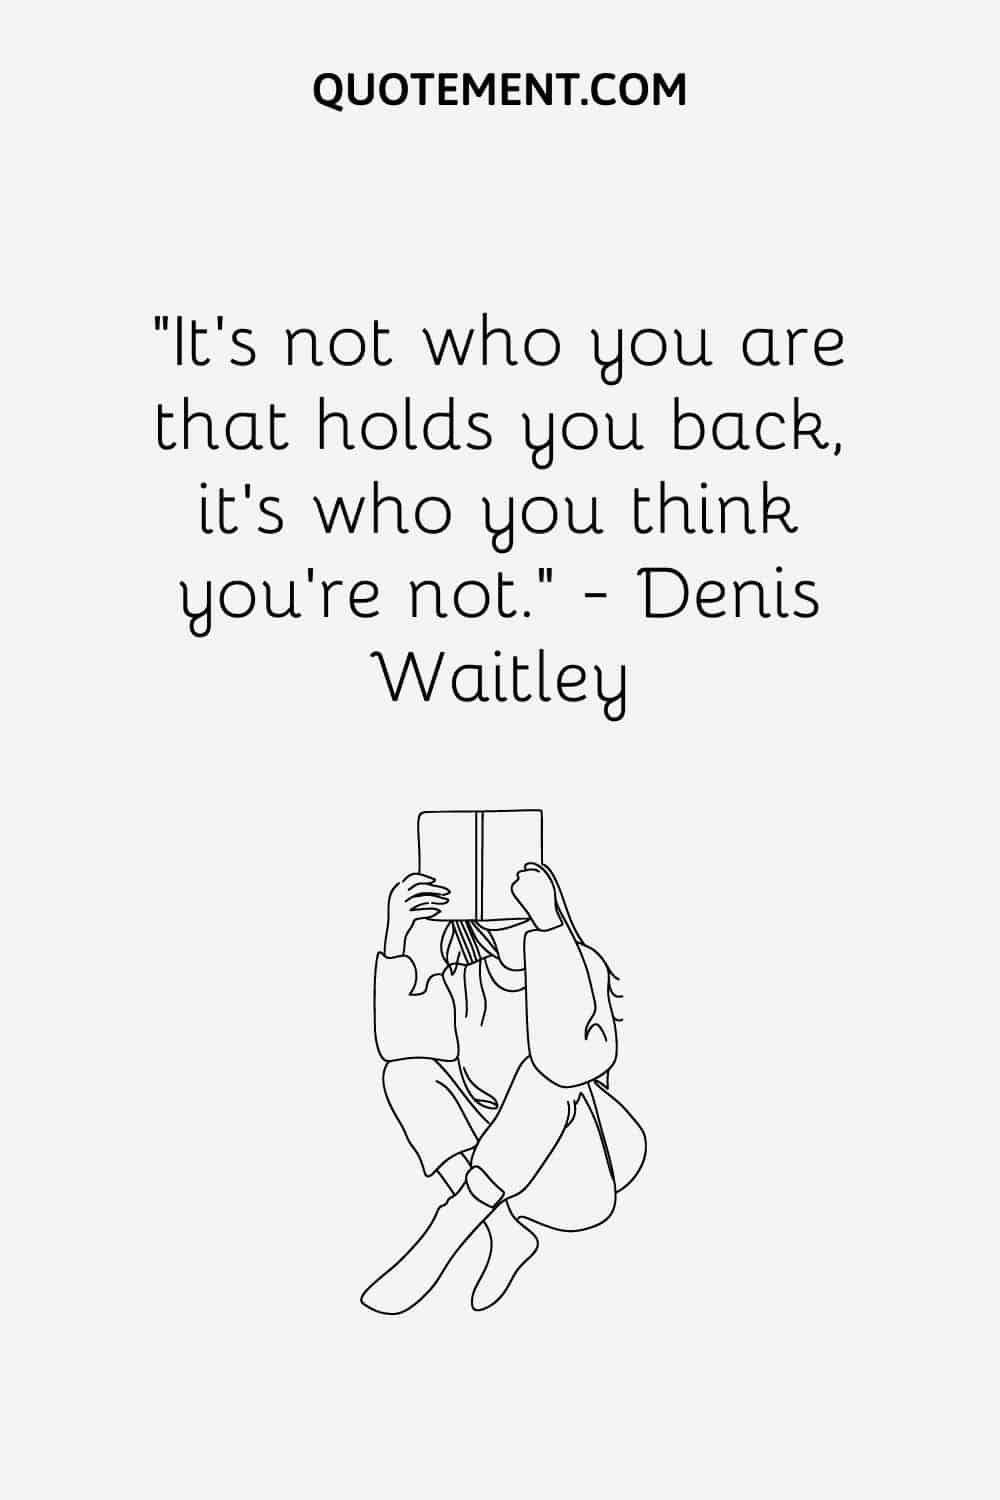 It’s not who you are that holds you back, it’s who you think you’re not